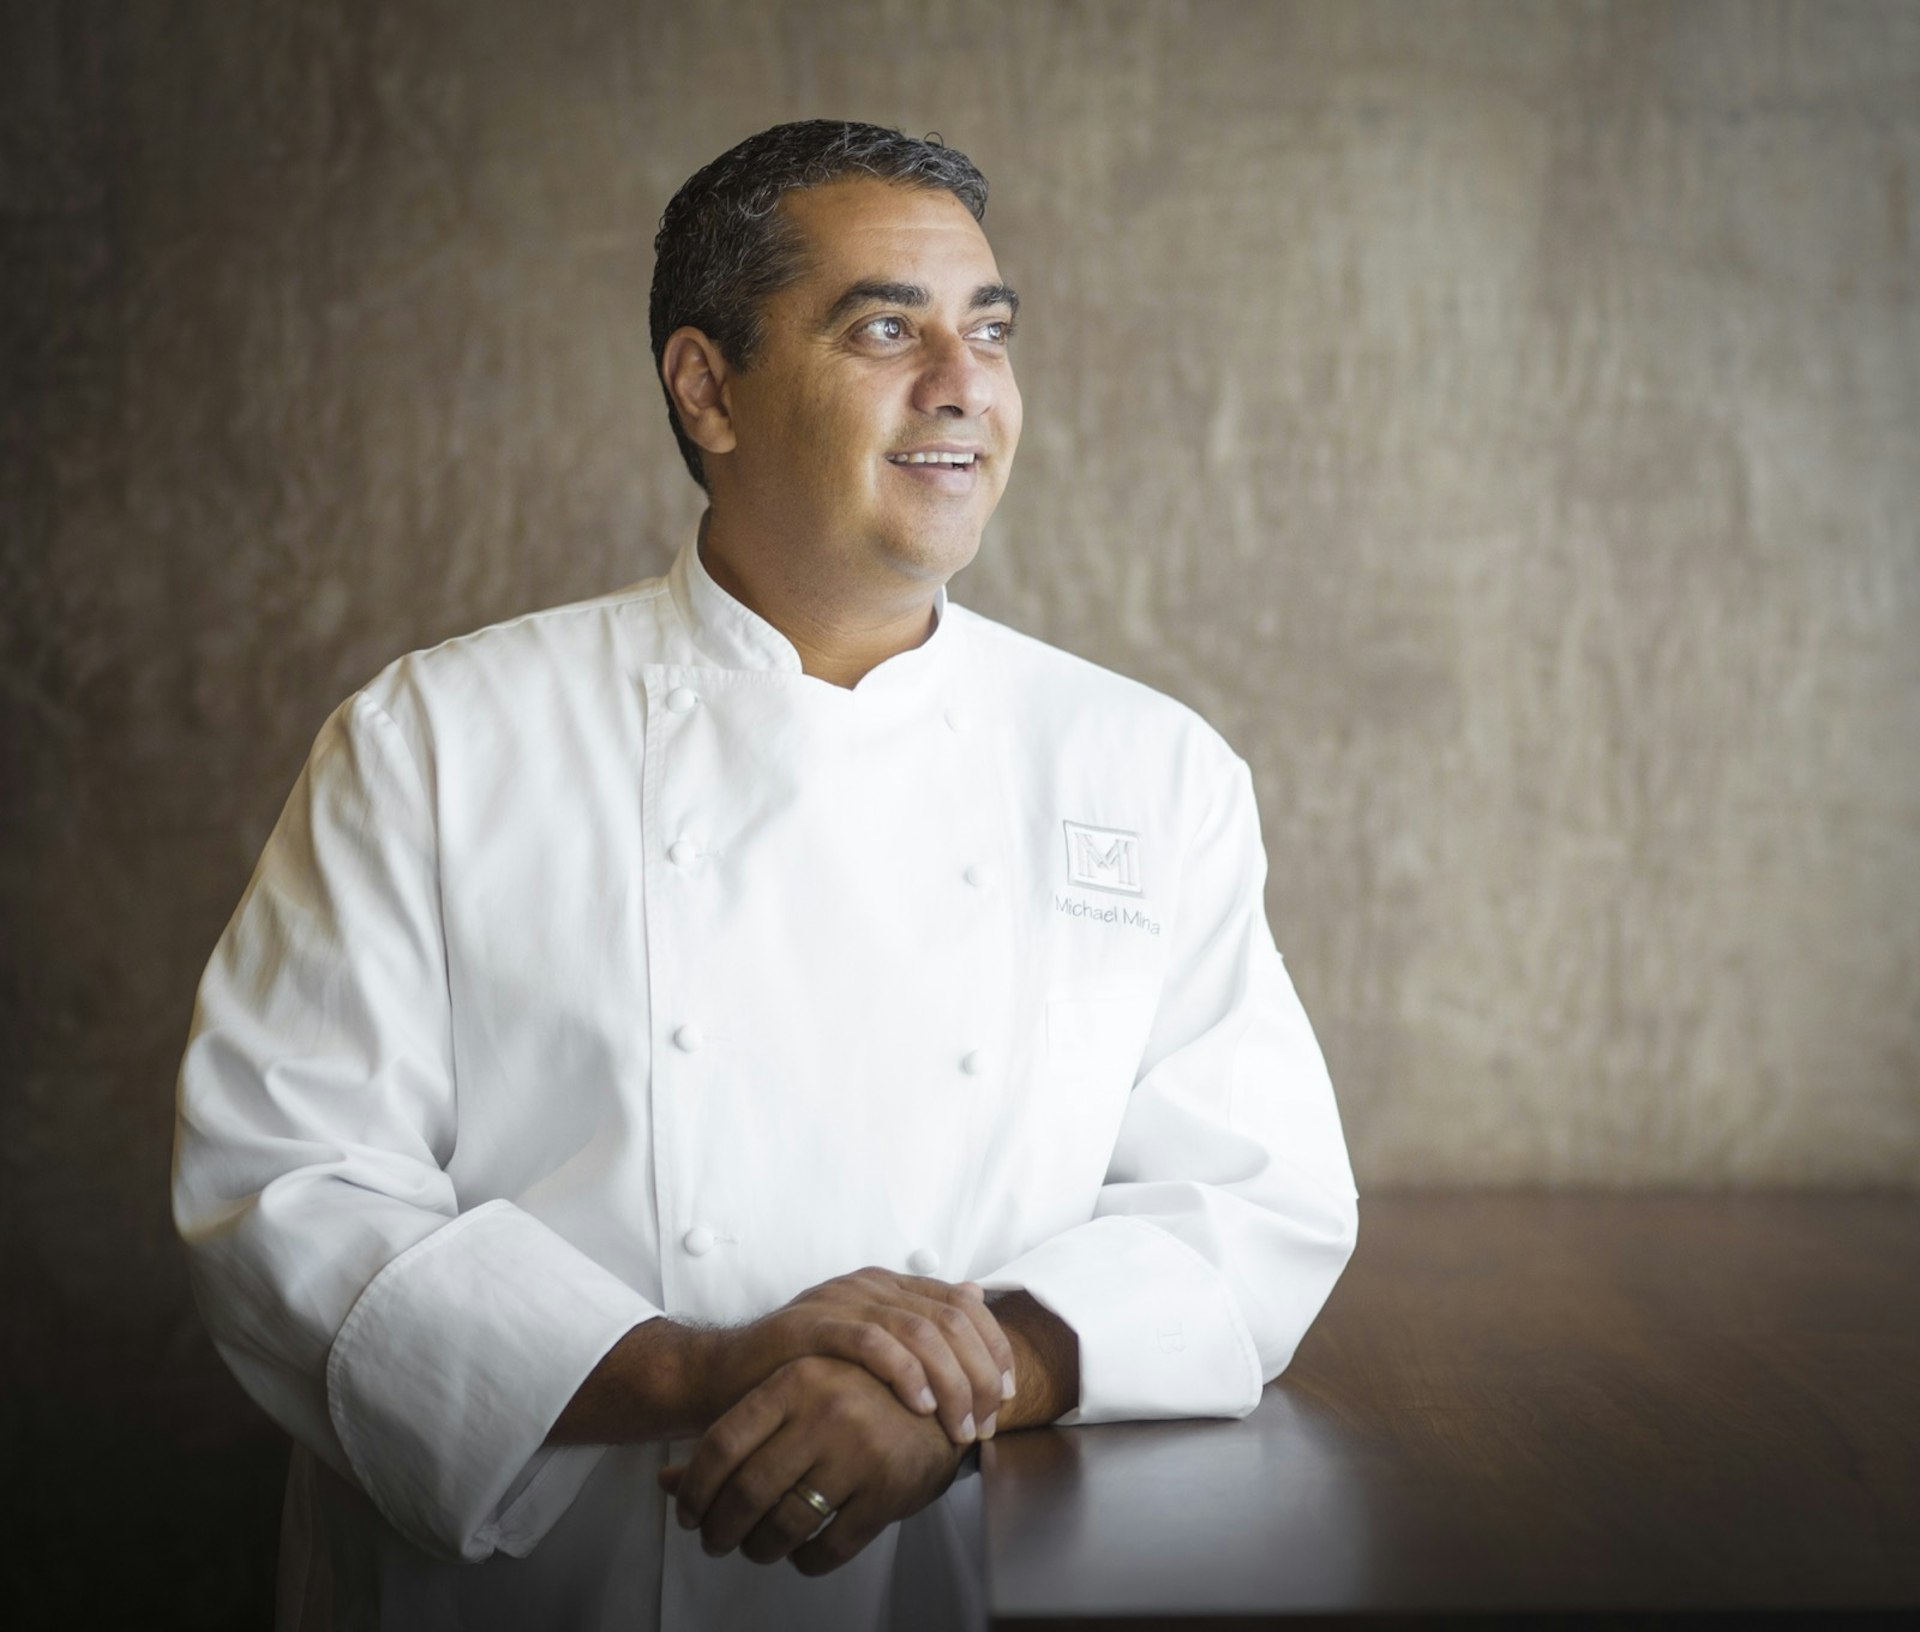 A publicity photo of celebrity chef Michael Mina smiling against a grey-brown backdrop